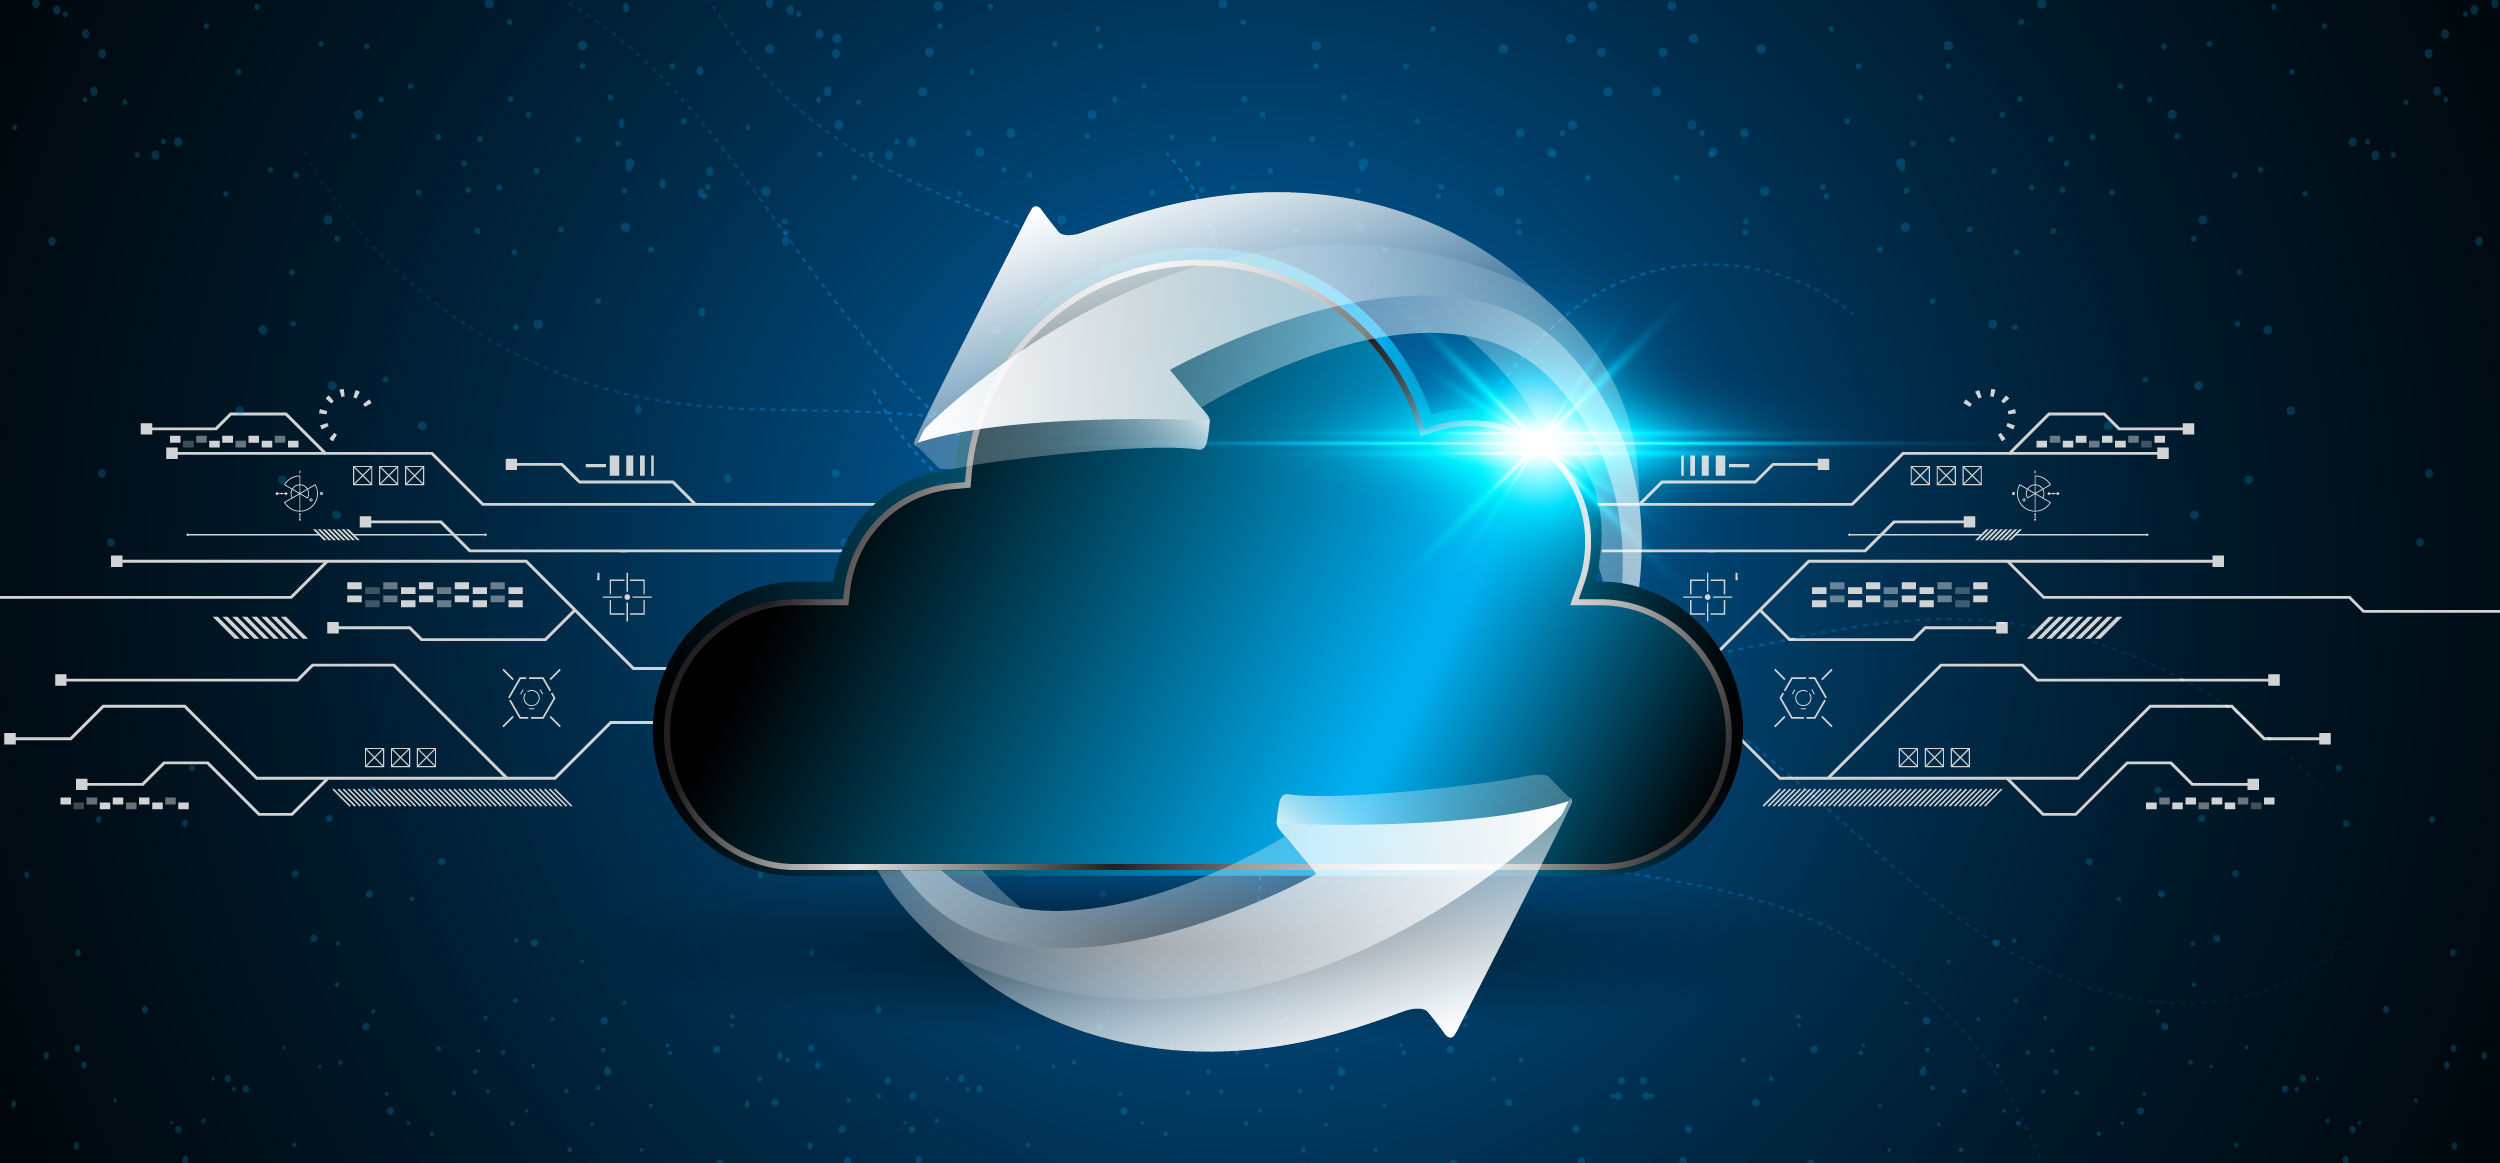 A Case for the Cloud - Why Construction Managers Should Implement Hosted Services